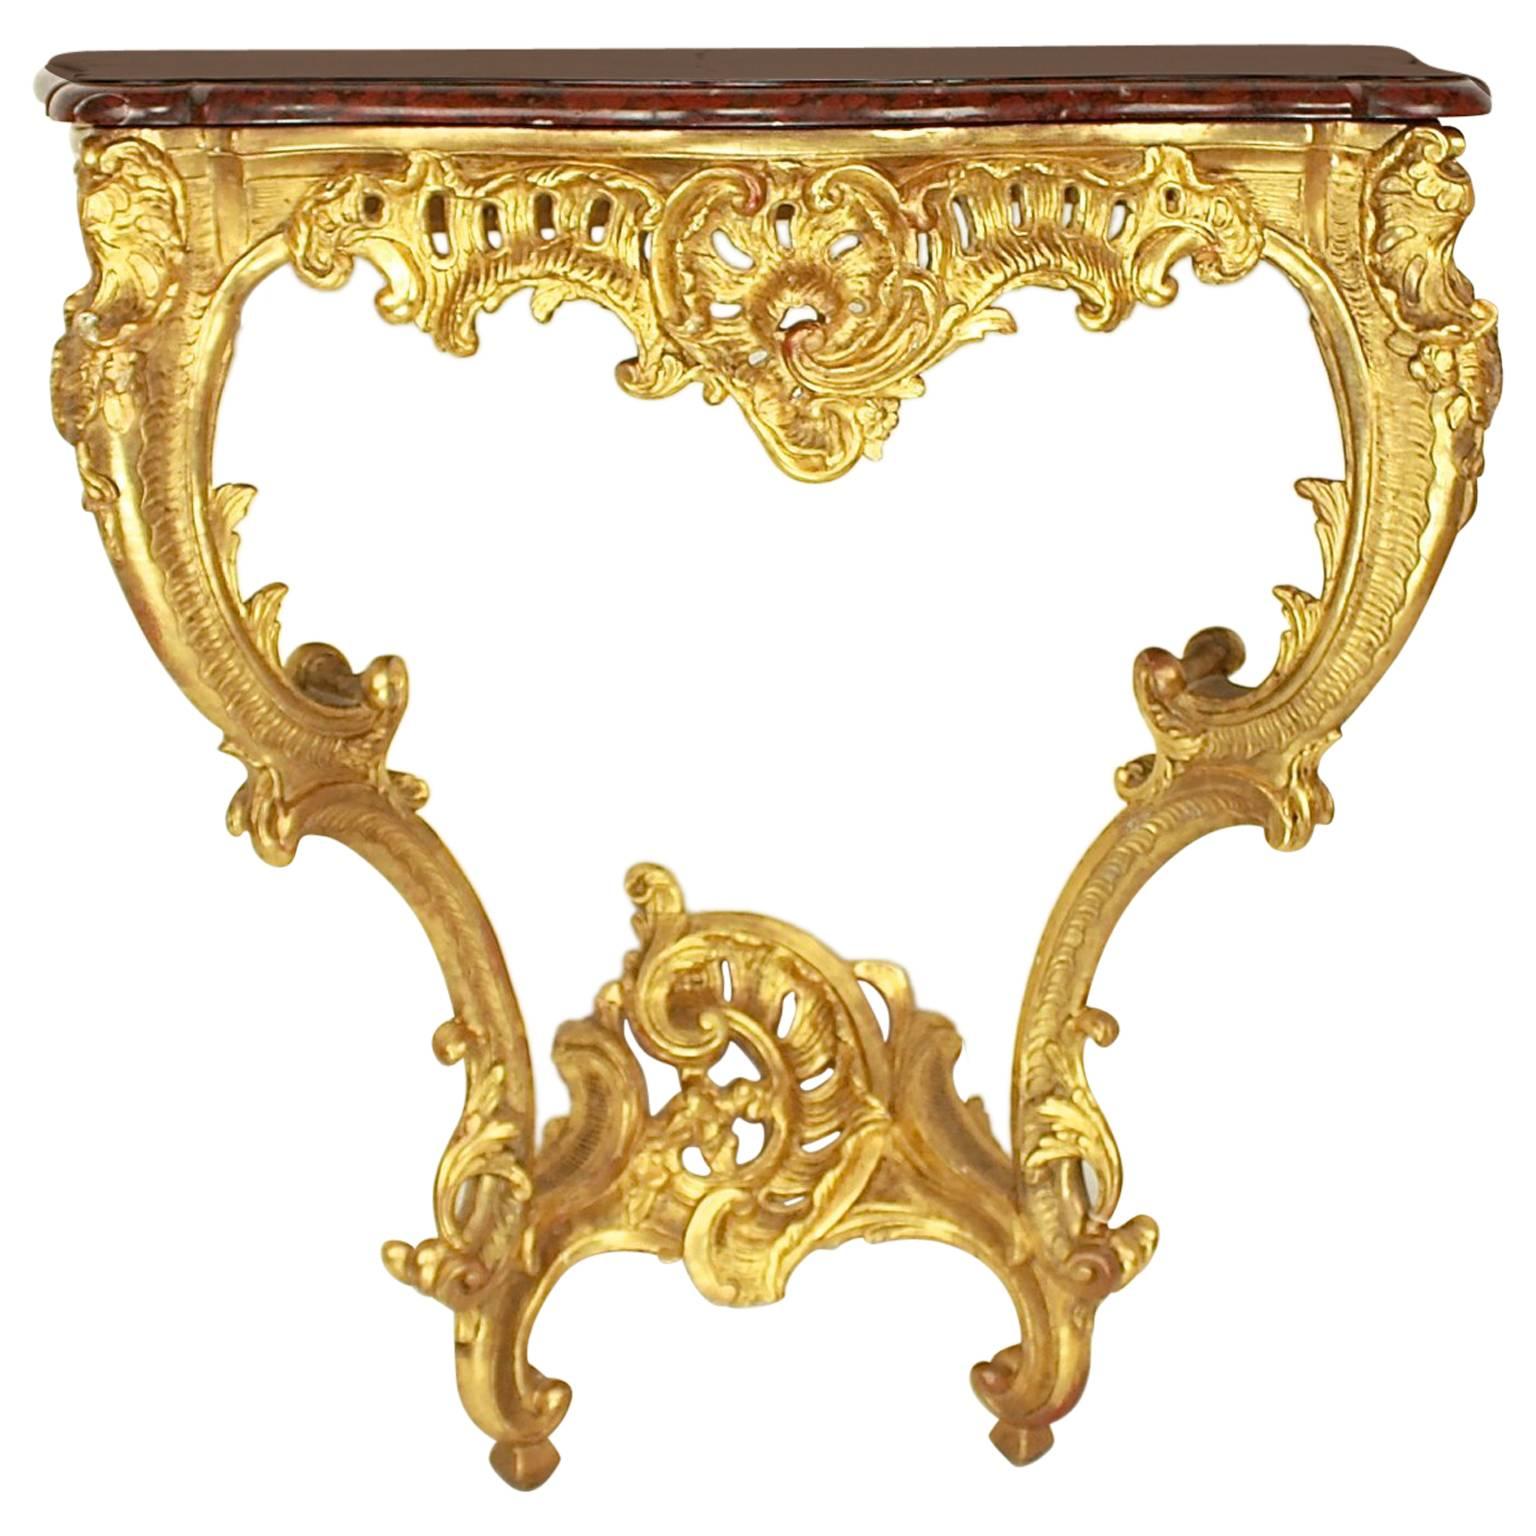 French Louis XV Giltwood Console Table, Mid-18th Century